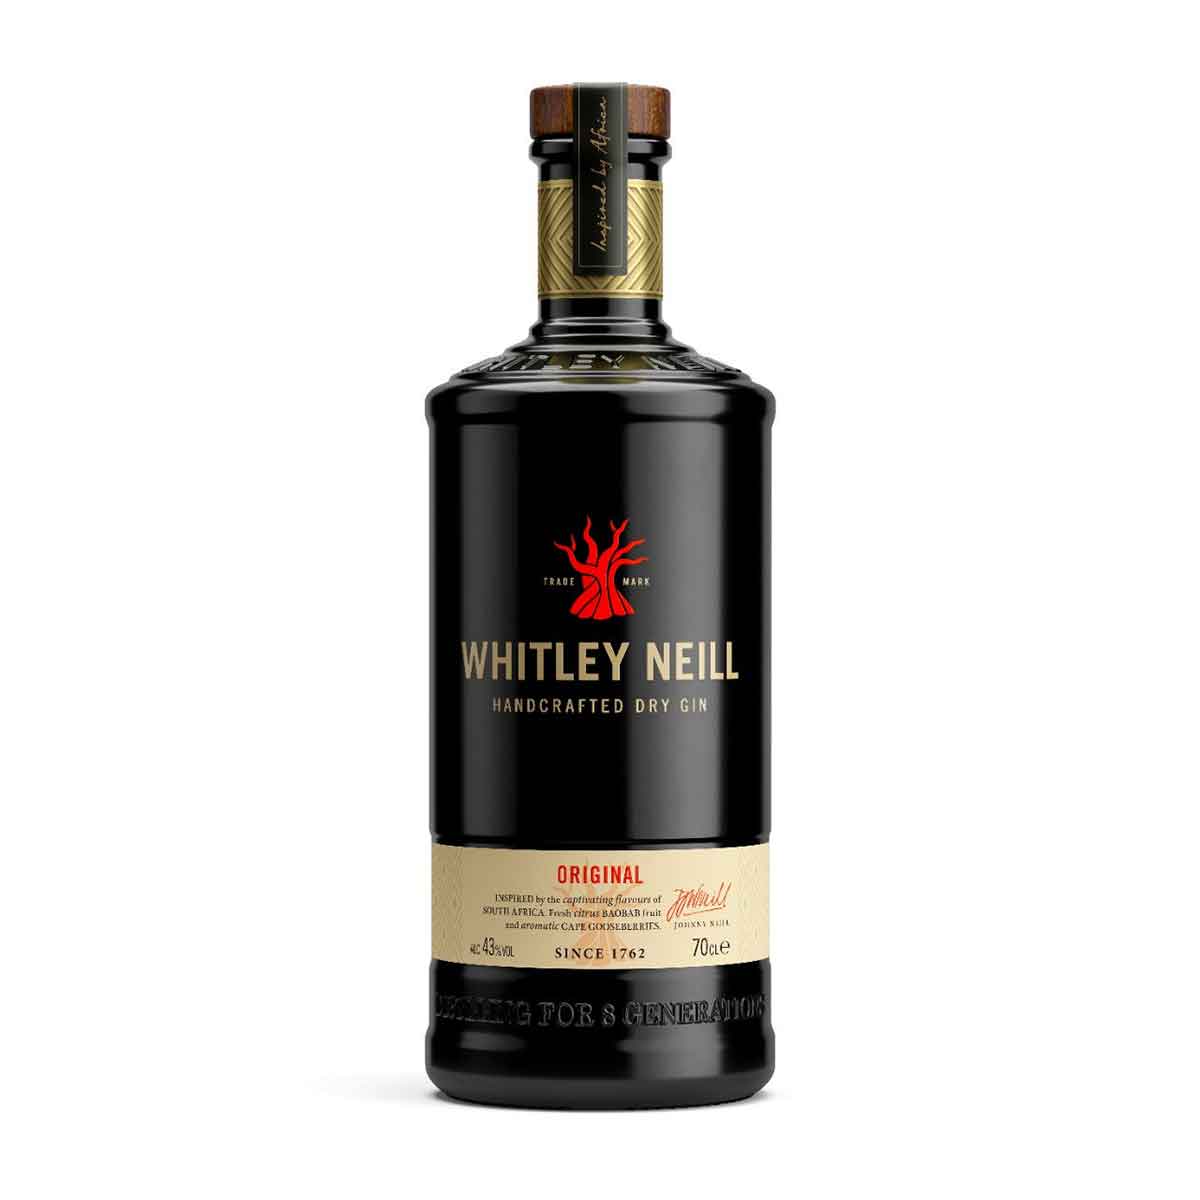 TAG Liquor Stores BC-WHITLEY NEILL DRY GIN 750M